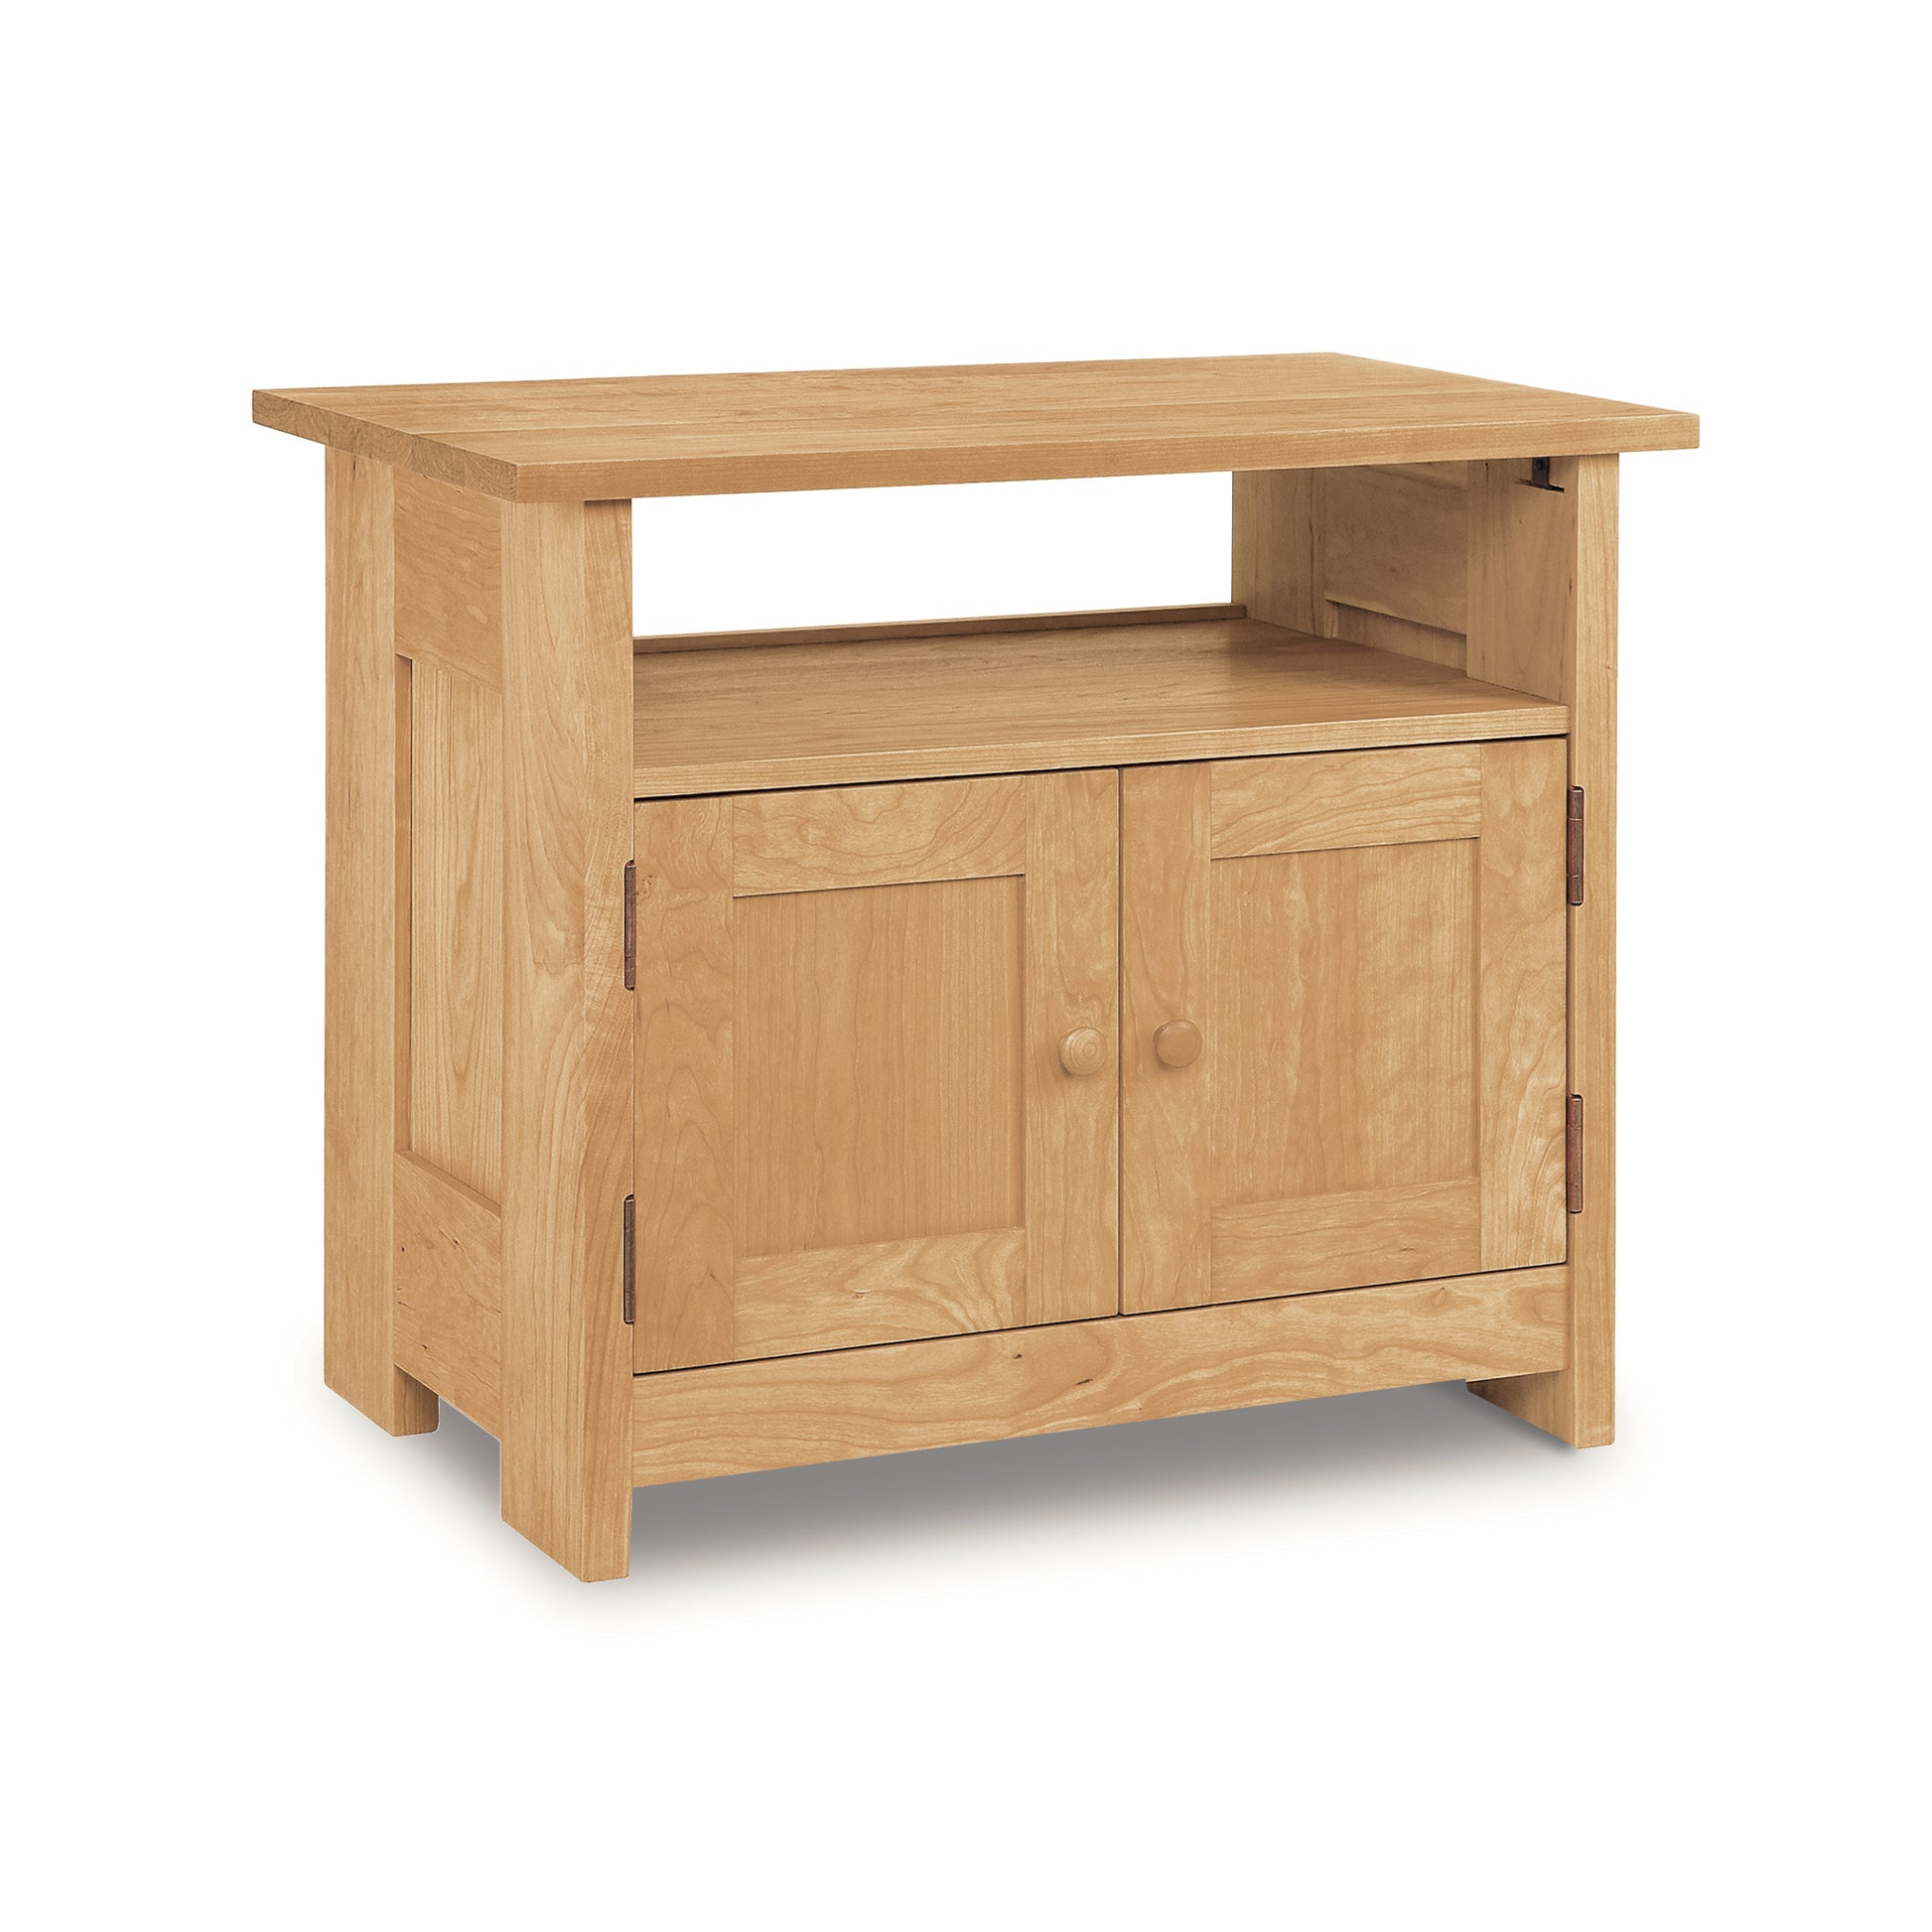 The Vermont Furniture Designs Homestead Small TV Stand is a handcrafted, high-end piece of solid wood furniture featuring a door.